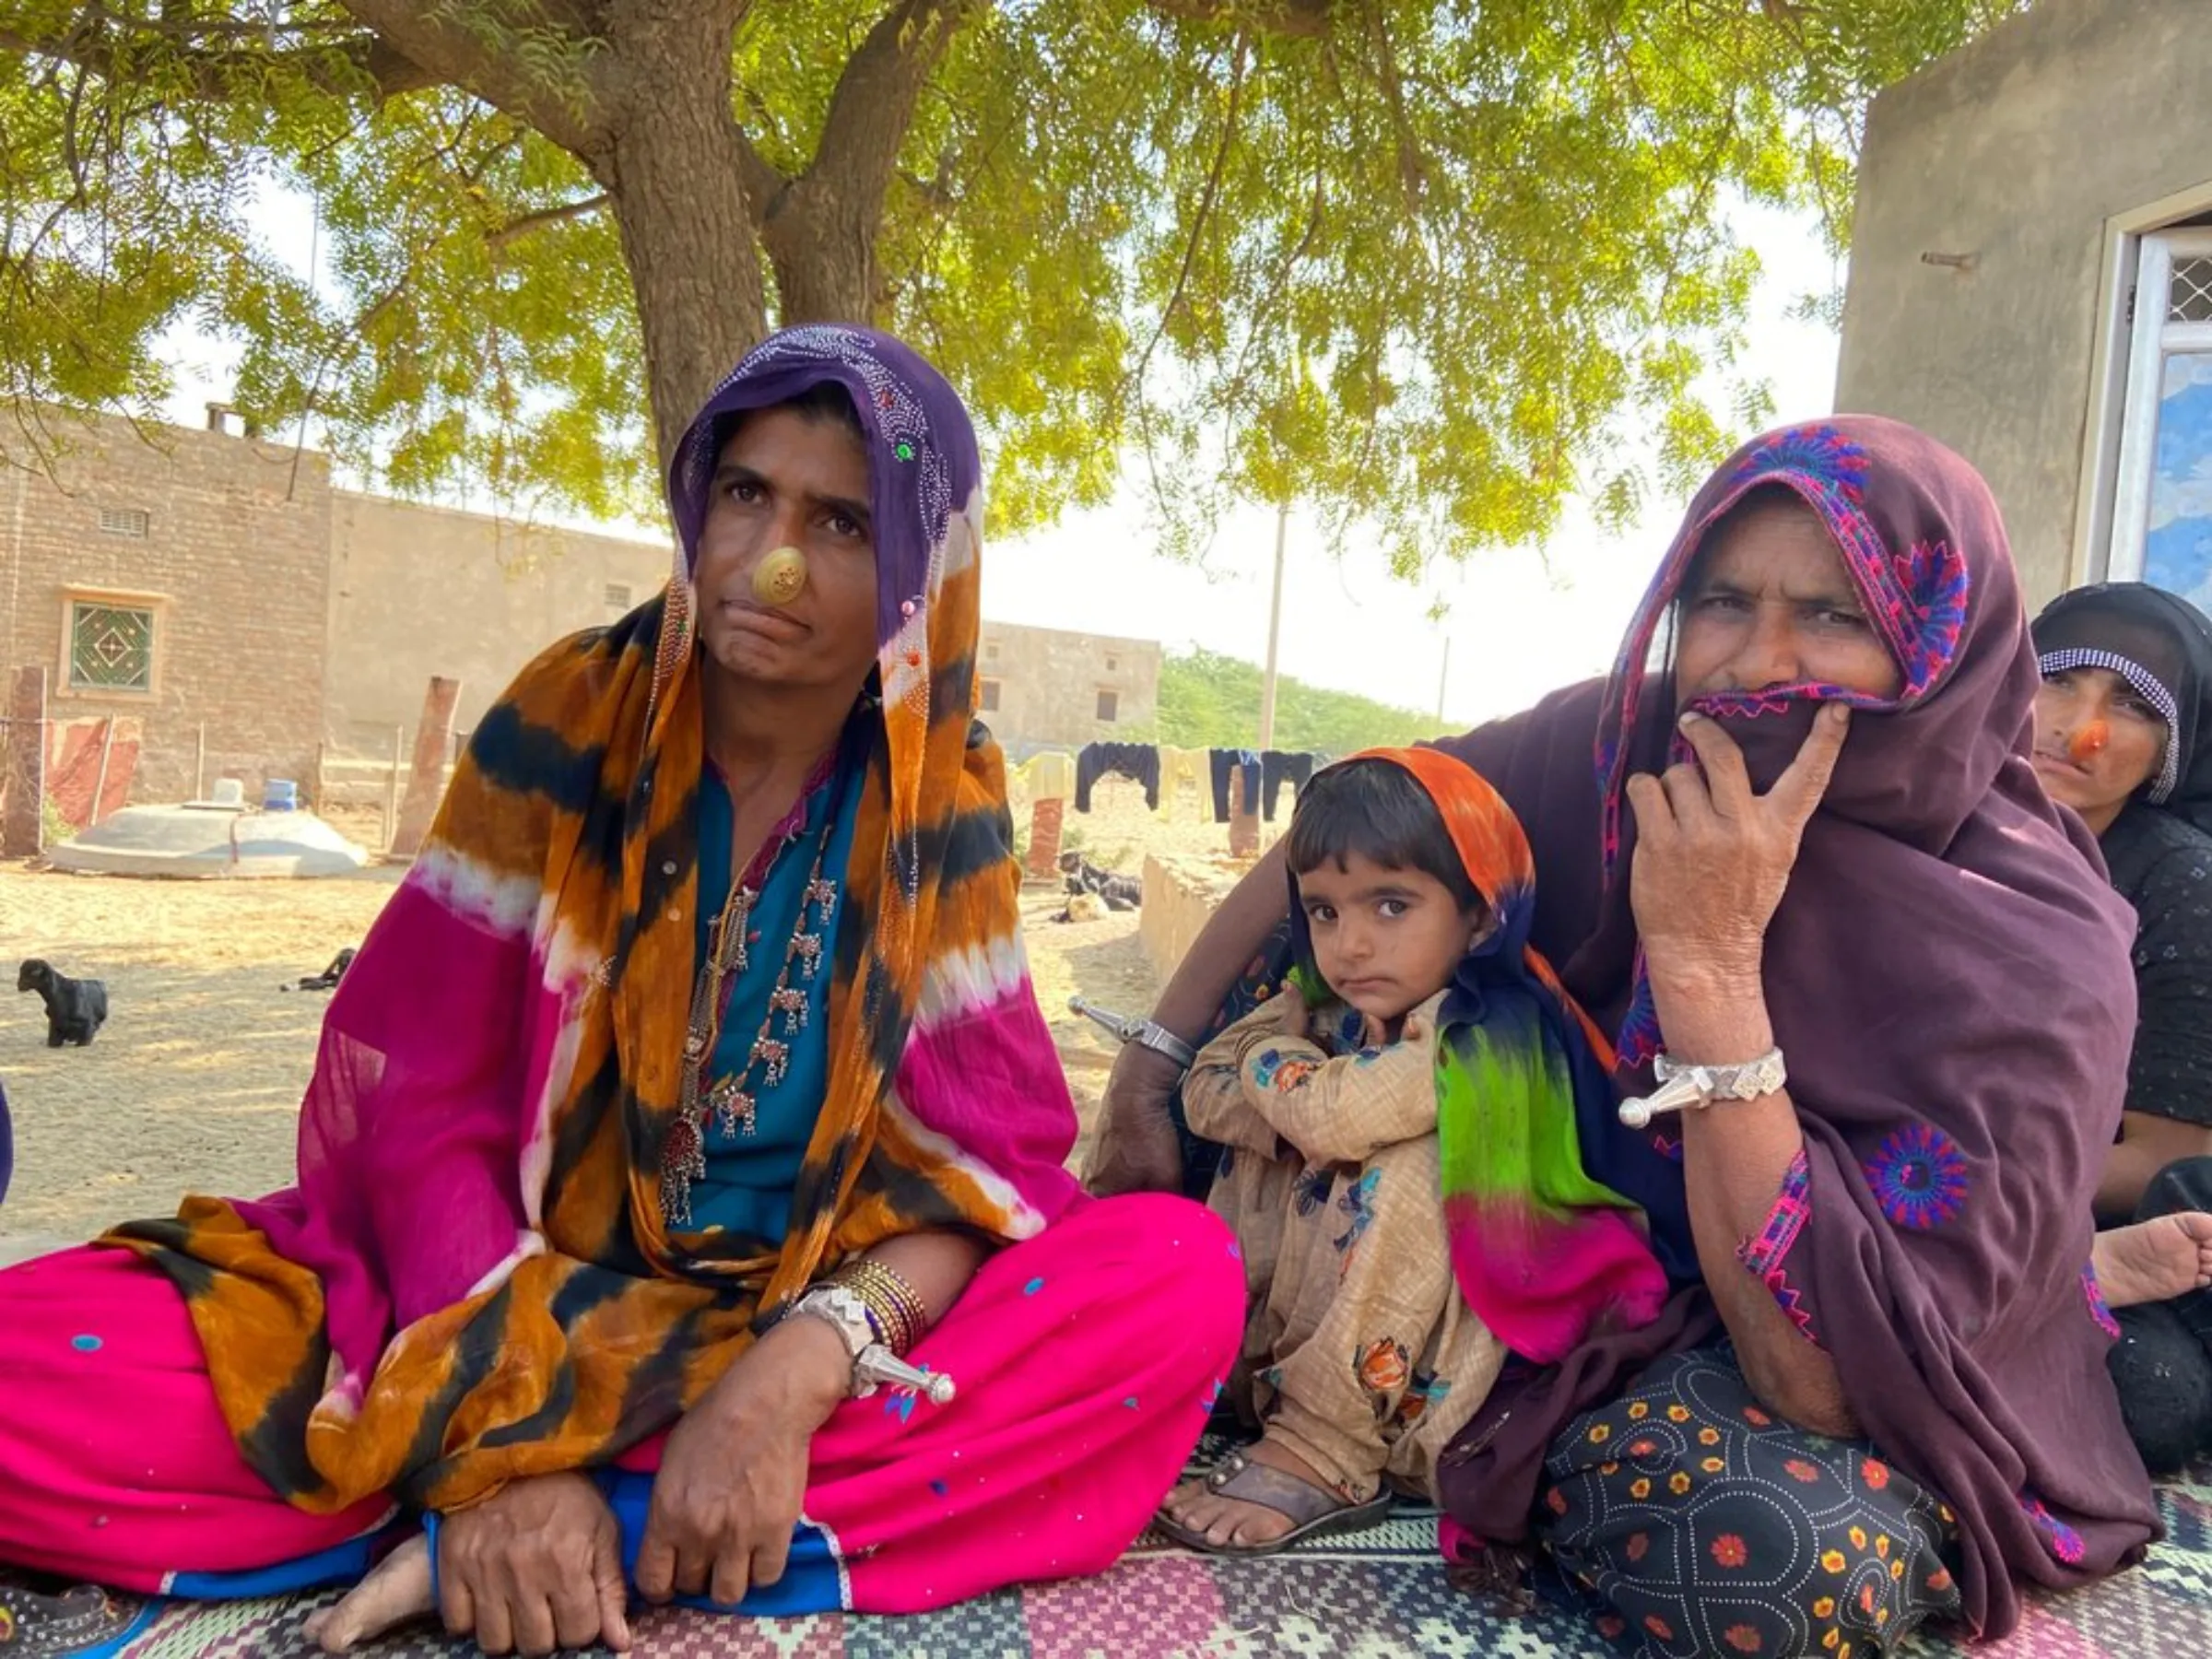 Dadda Khatoon (left) poses for a picture with other women and children of her village near Bhadla Solar Park, Rajasthan, India, December 11, 2021